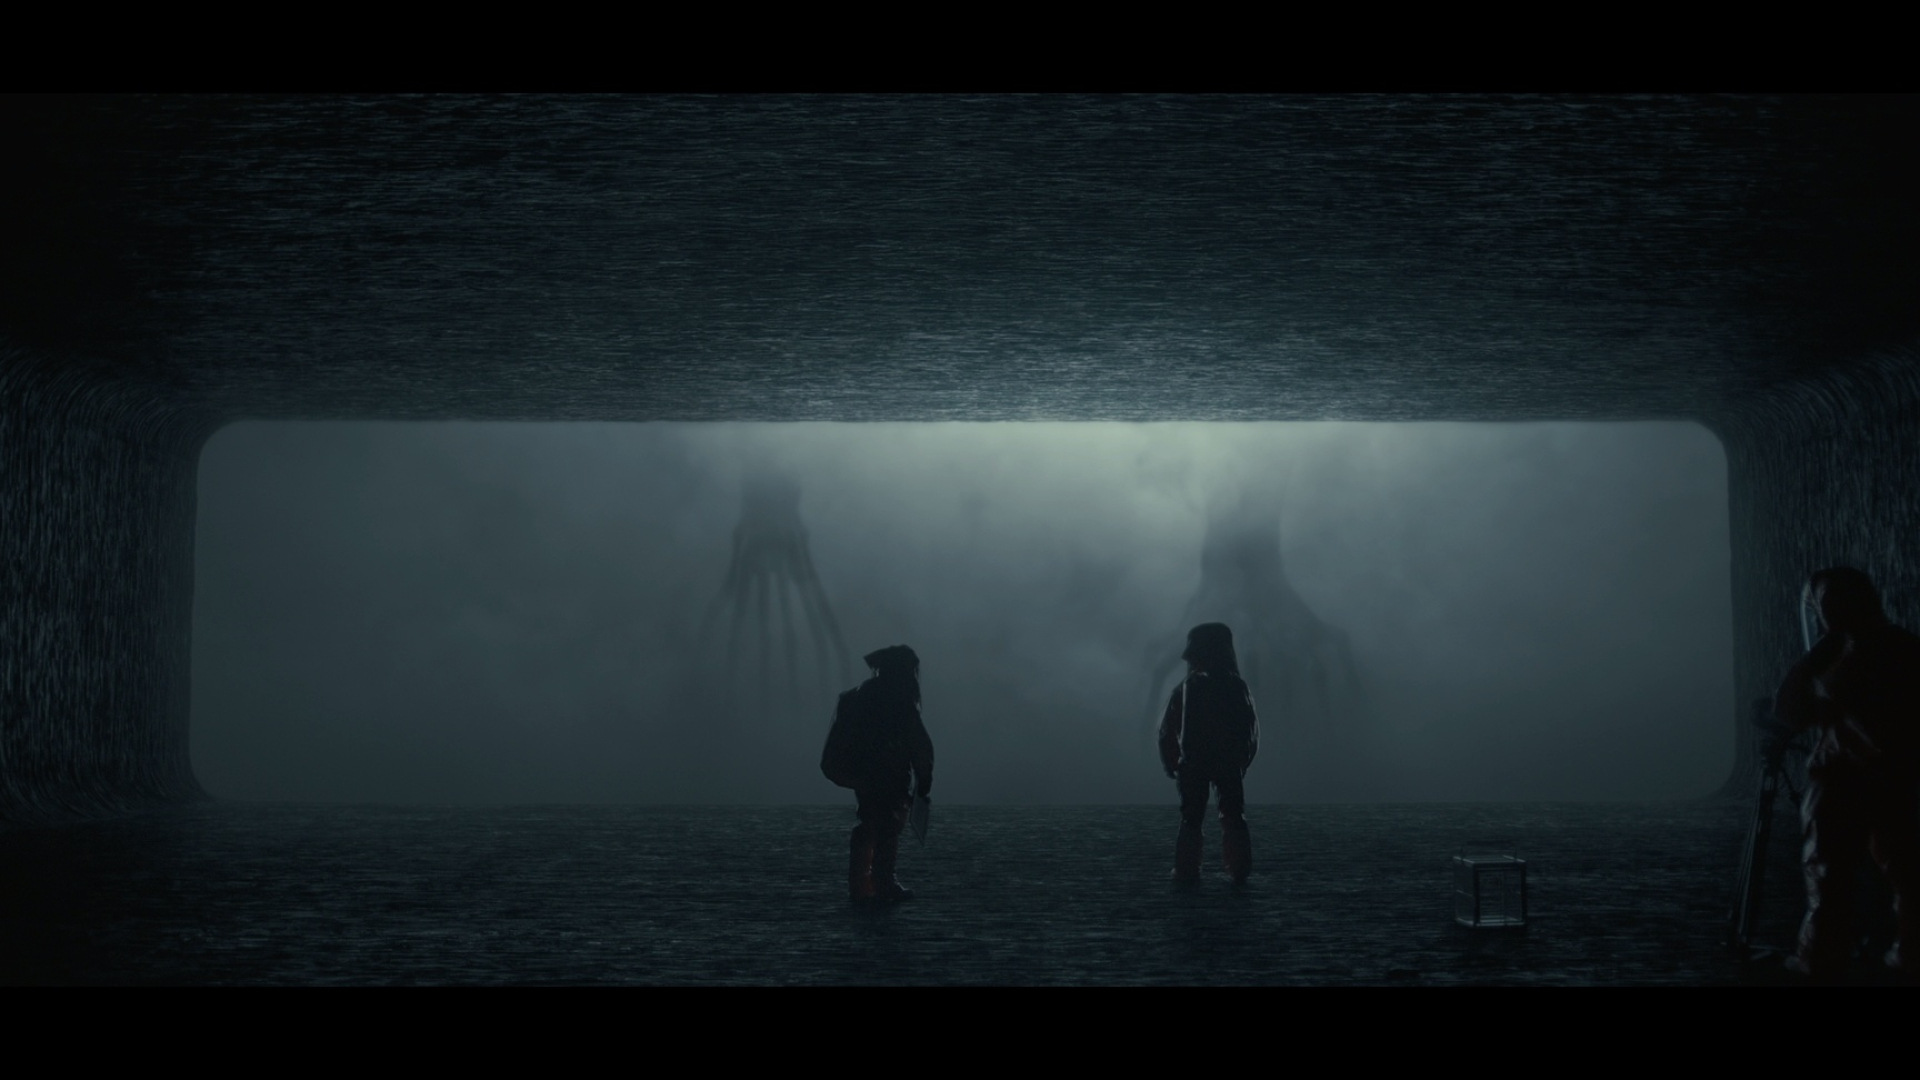 Arrival (Movie): Received critical acclaim, with particular praise for Adams's performance, Villeneuve's direction, and the exploration of communication with extraterrestrial intelligence. 1920x1080 Full HD Background.